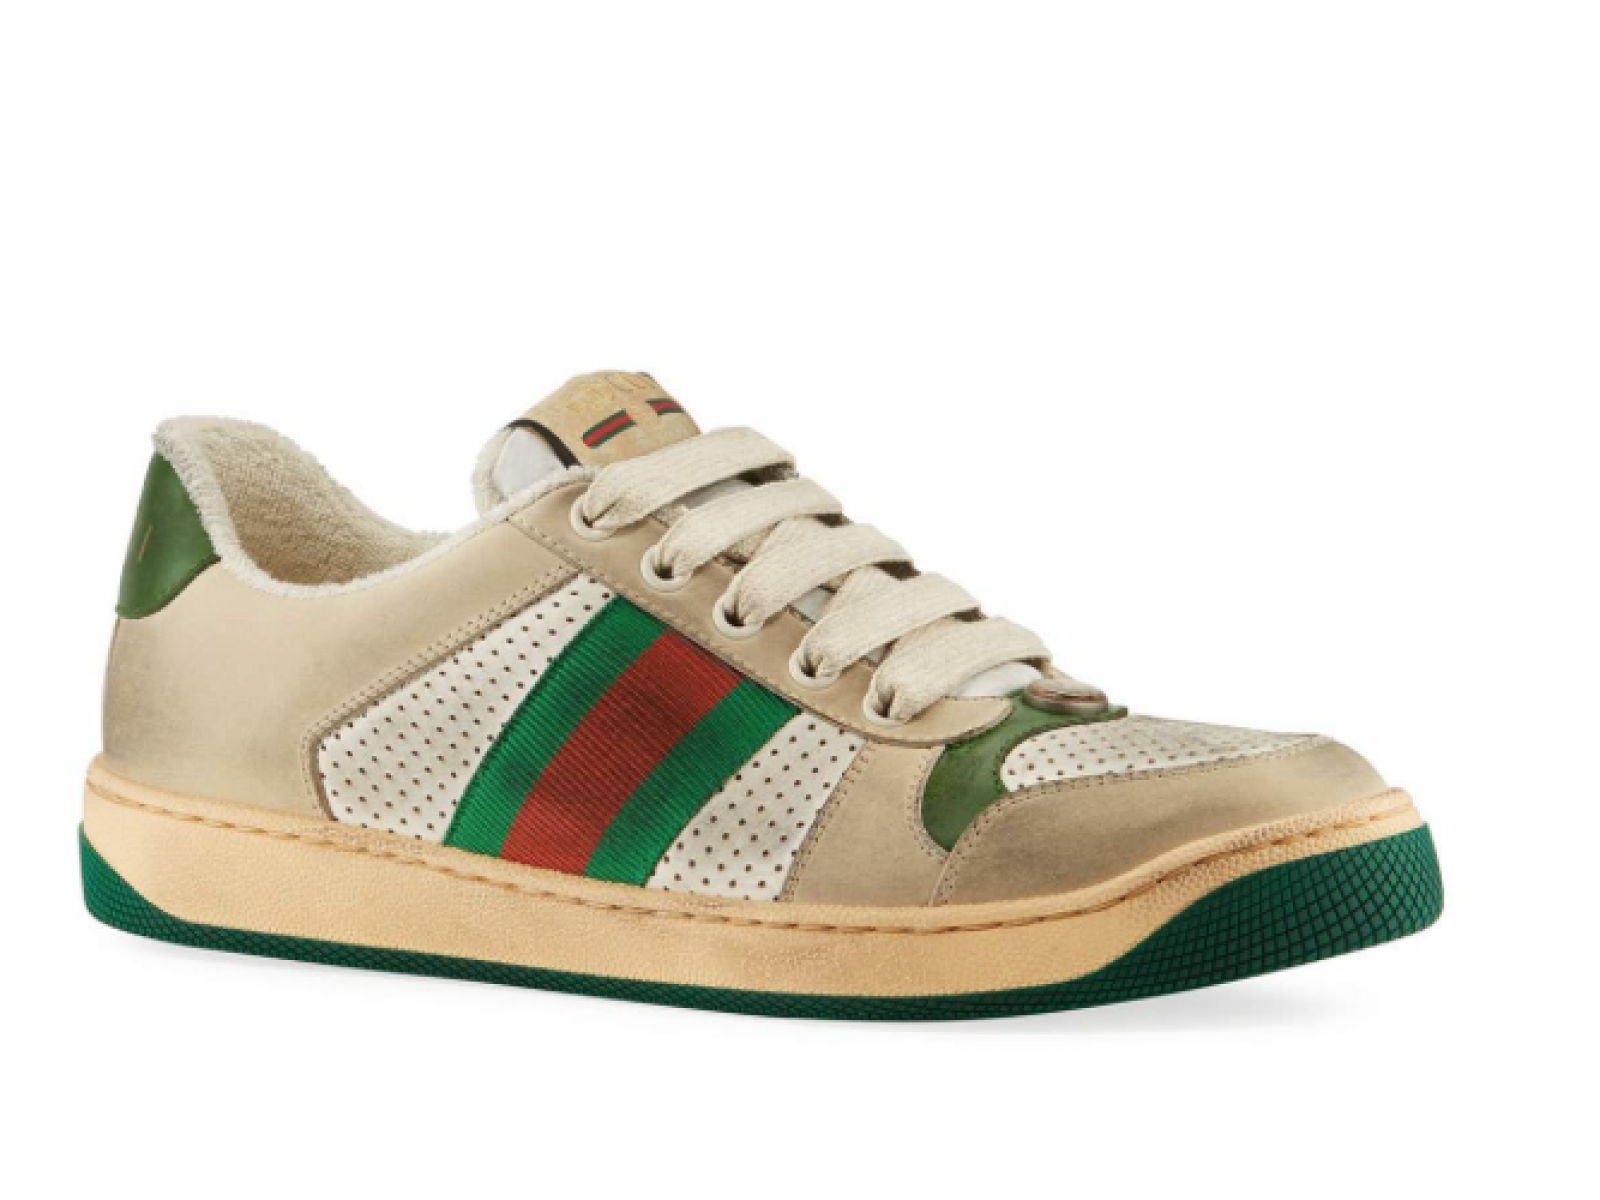 Snart Uluru fingeraftryk Dirty' Gucci Shoes Sell For $870, Come With Cleaning Instructions